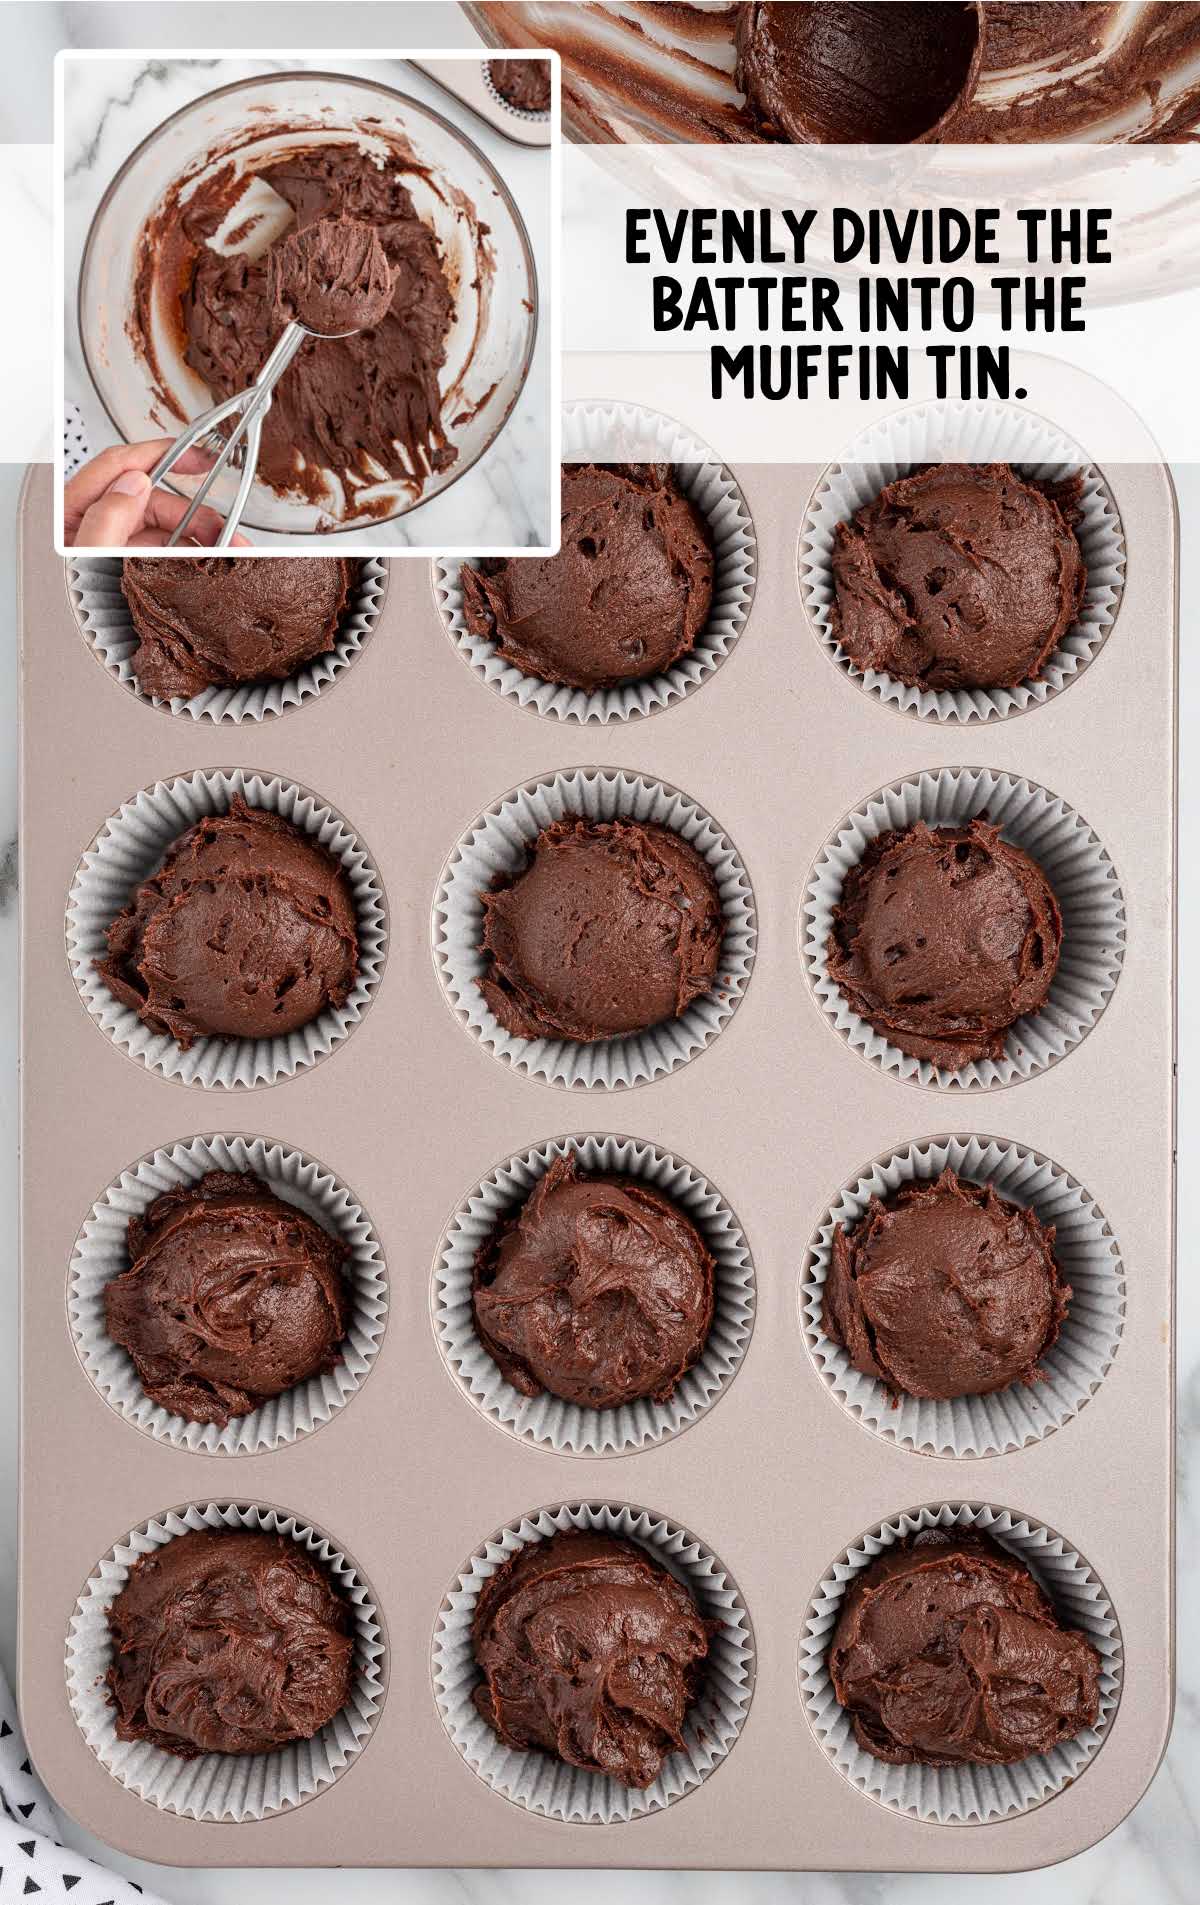 batter divided into the muffin tin